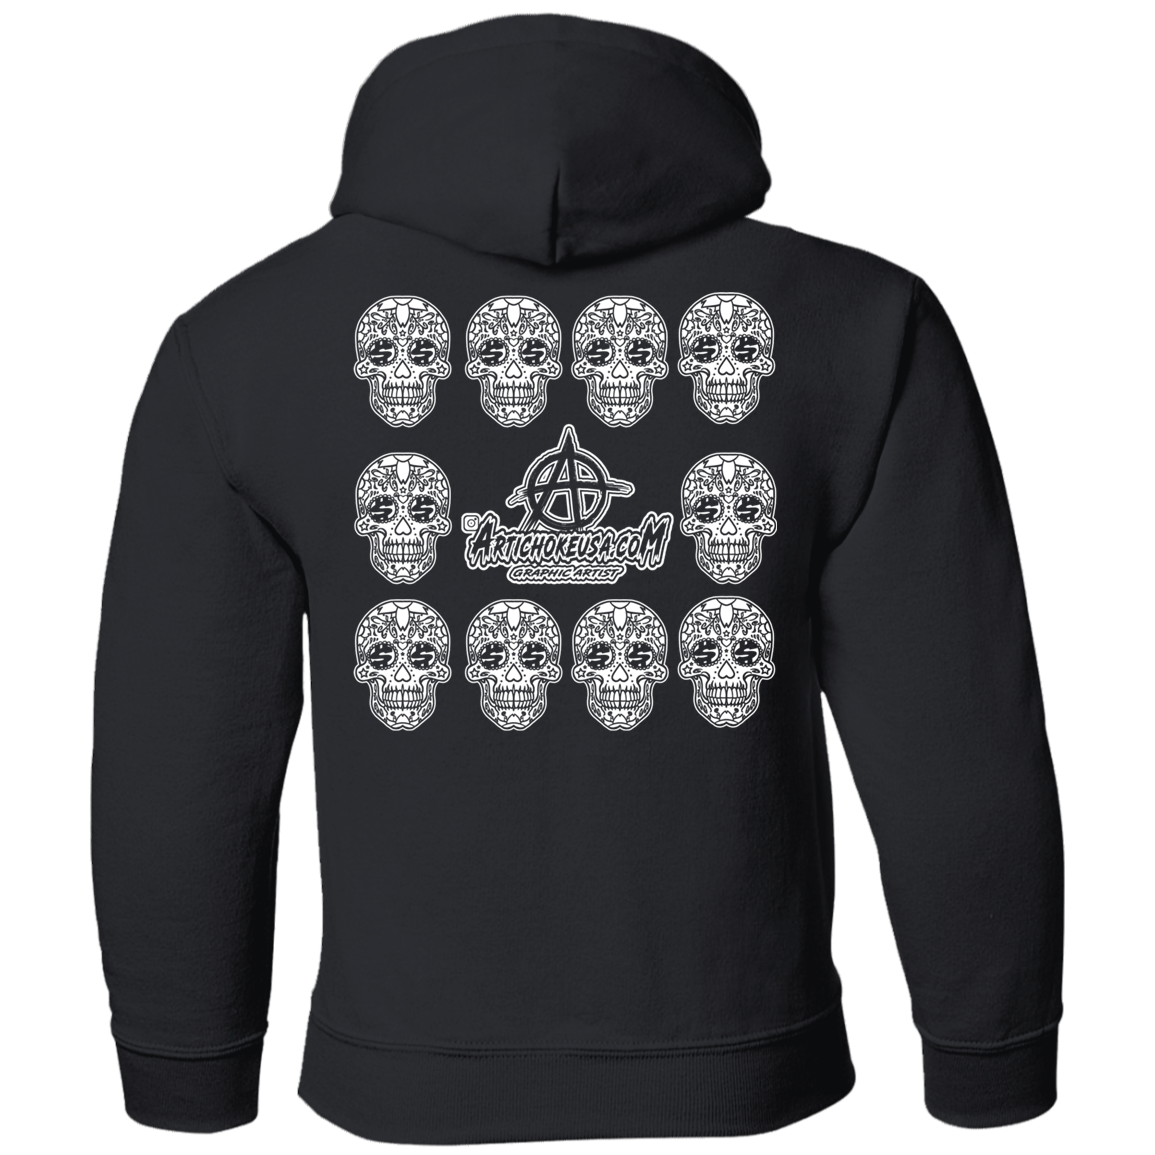 ArtichokeUSA Custom Design. You Win Some, You Lose Some, But You Get Paid For All. Youth Pullover Hoodie